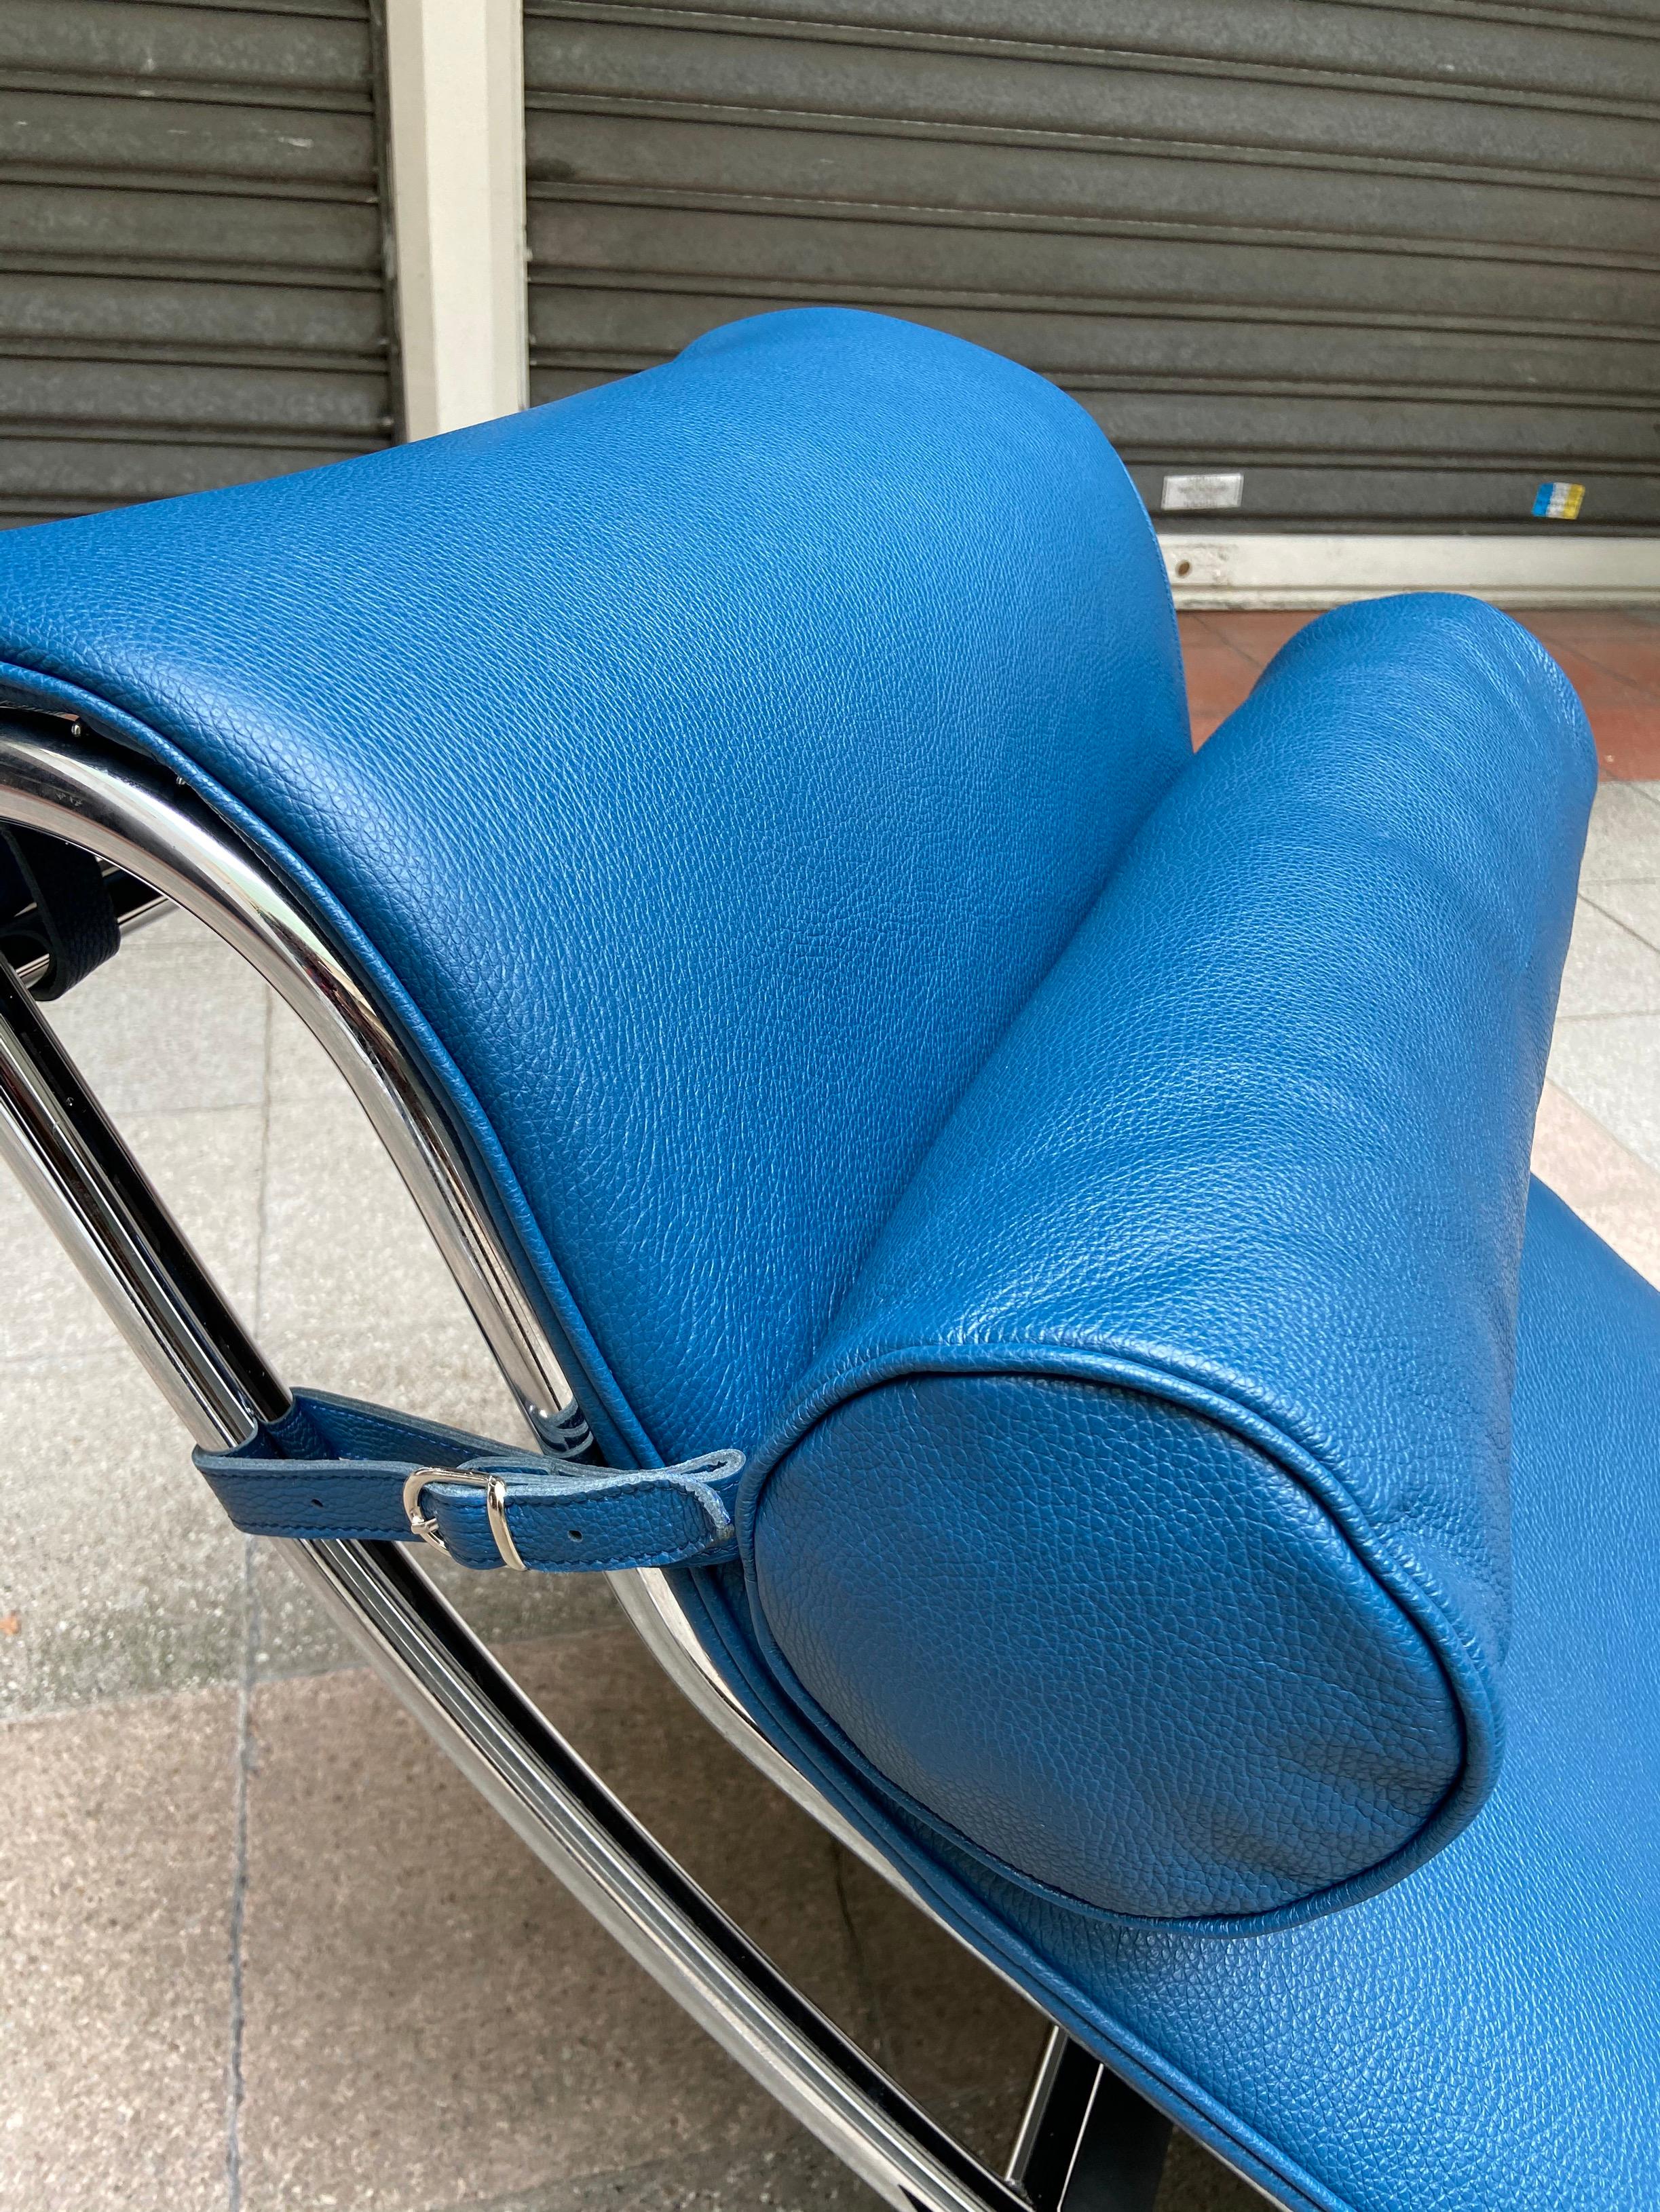 Chaise longue LC4 Poney blue leather - Le Corbusier and Charlotte Perriand 
Cassina Edition
2016
Engraved and numbered 
Sold with its certificate 
Blue grained leather
Measures: D 157 cm W 55 cm H 71 cm
2700€.